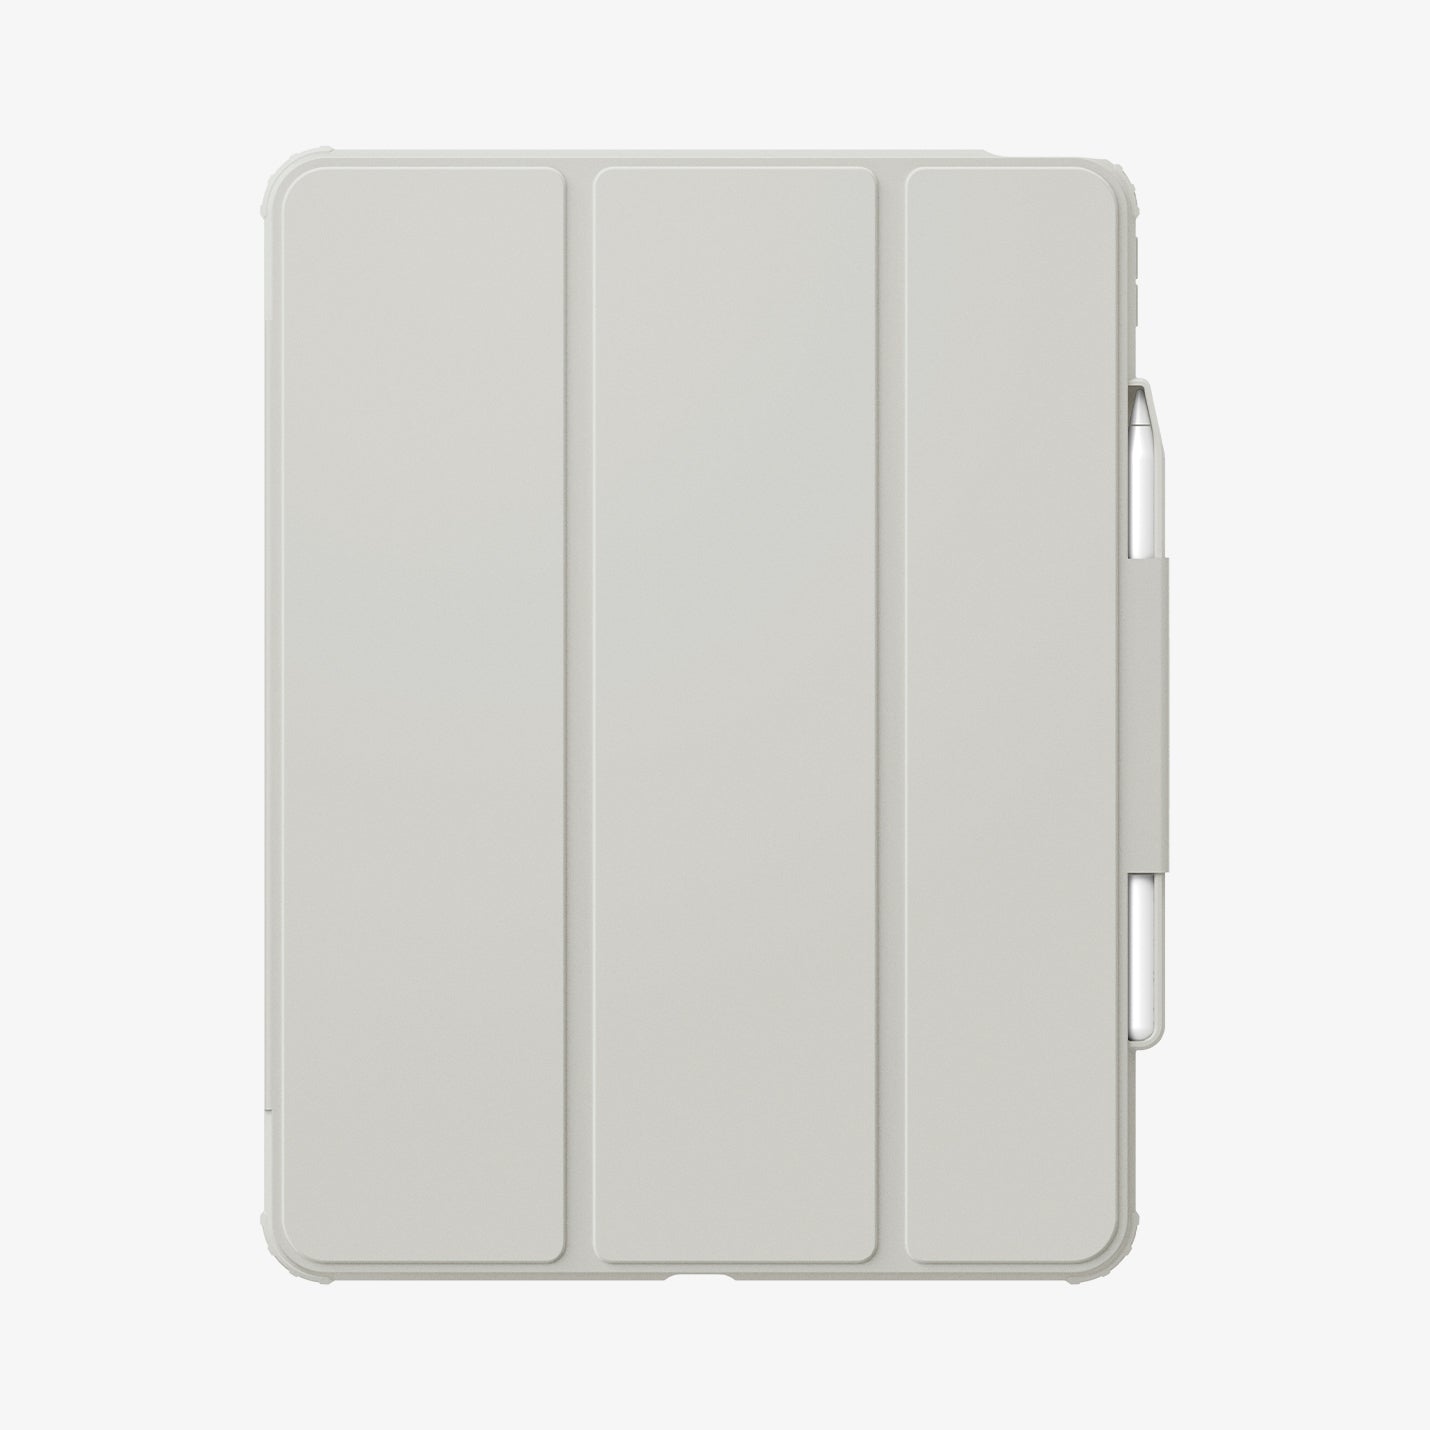 ACS07677 - iPad Air 12.9-inch Case Air Skin Pro in Gray showing the front with s-pen attached